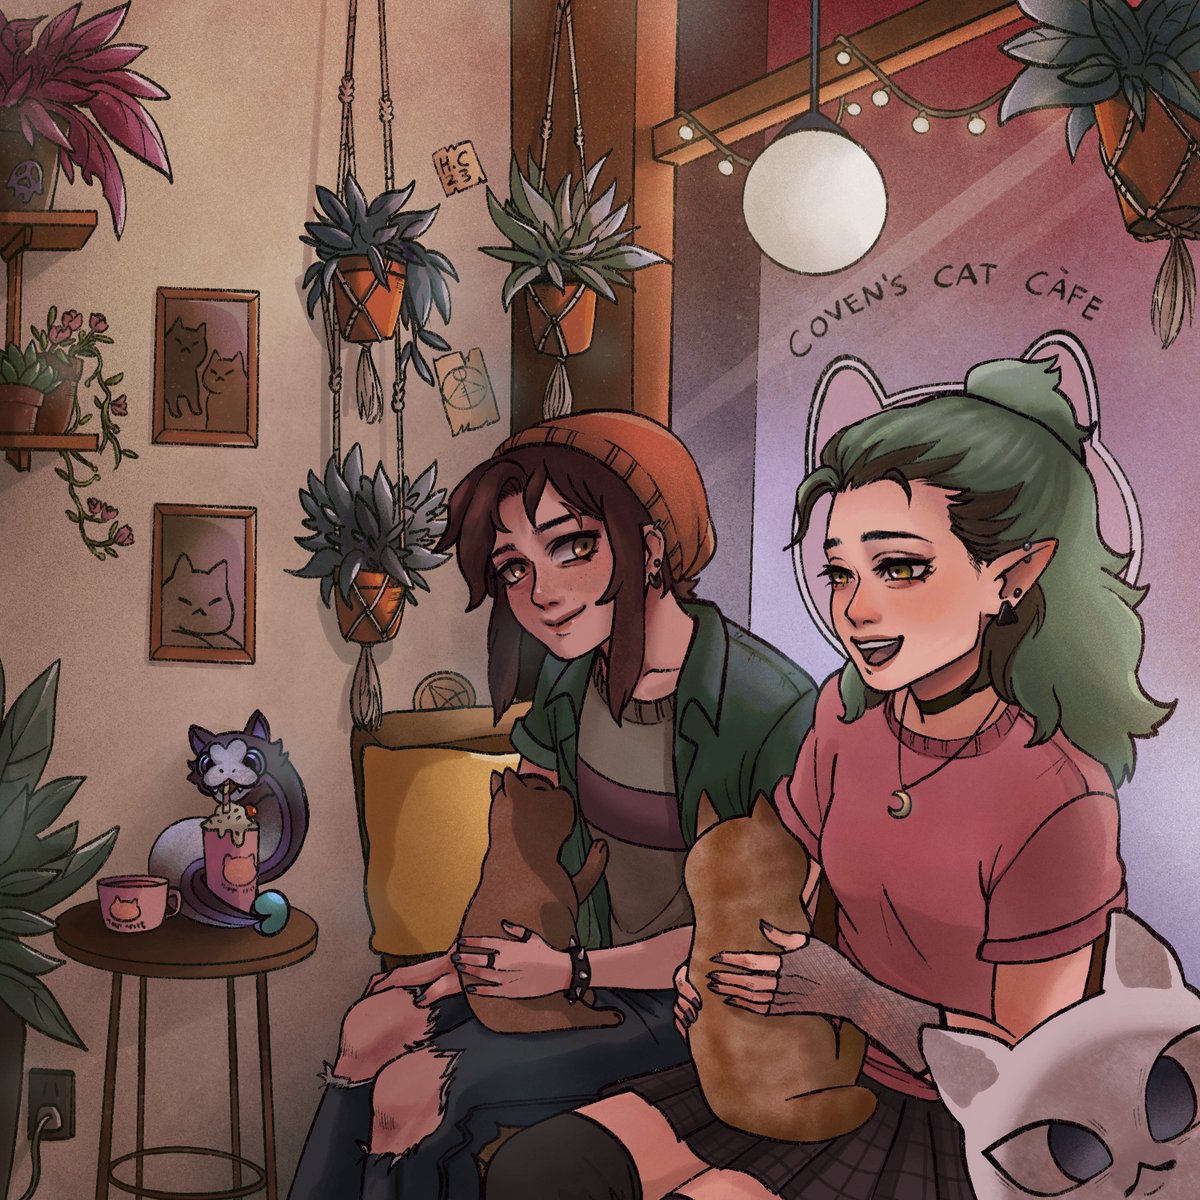 Luz and Amity is having a date in the Coven’s cat cafe! This took me quite some time to get the lightings right but I had sm fun💗

#lumity #lumityfanart #lumityart #tohfanart #amity #luz #TheOwlHouse #theowlhousefanart #digtalart #digitaldrawing #digitalillustration #lumitybeta